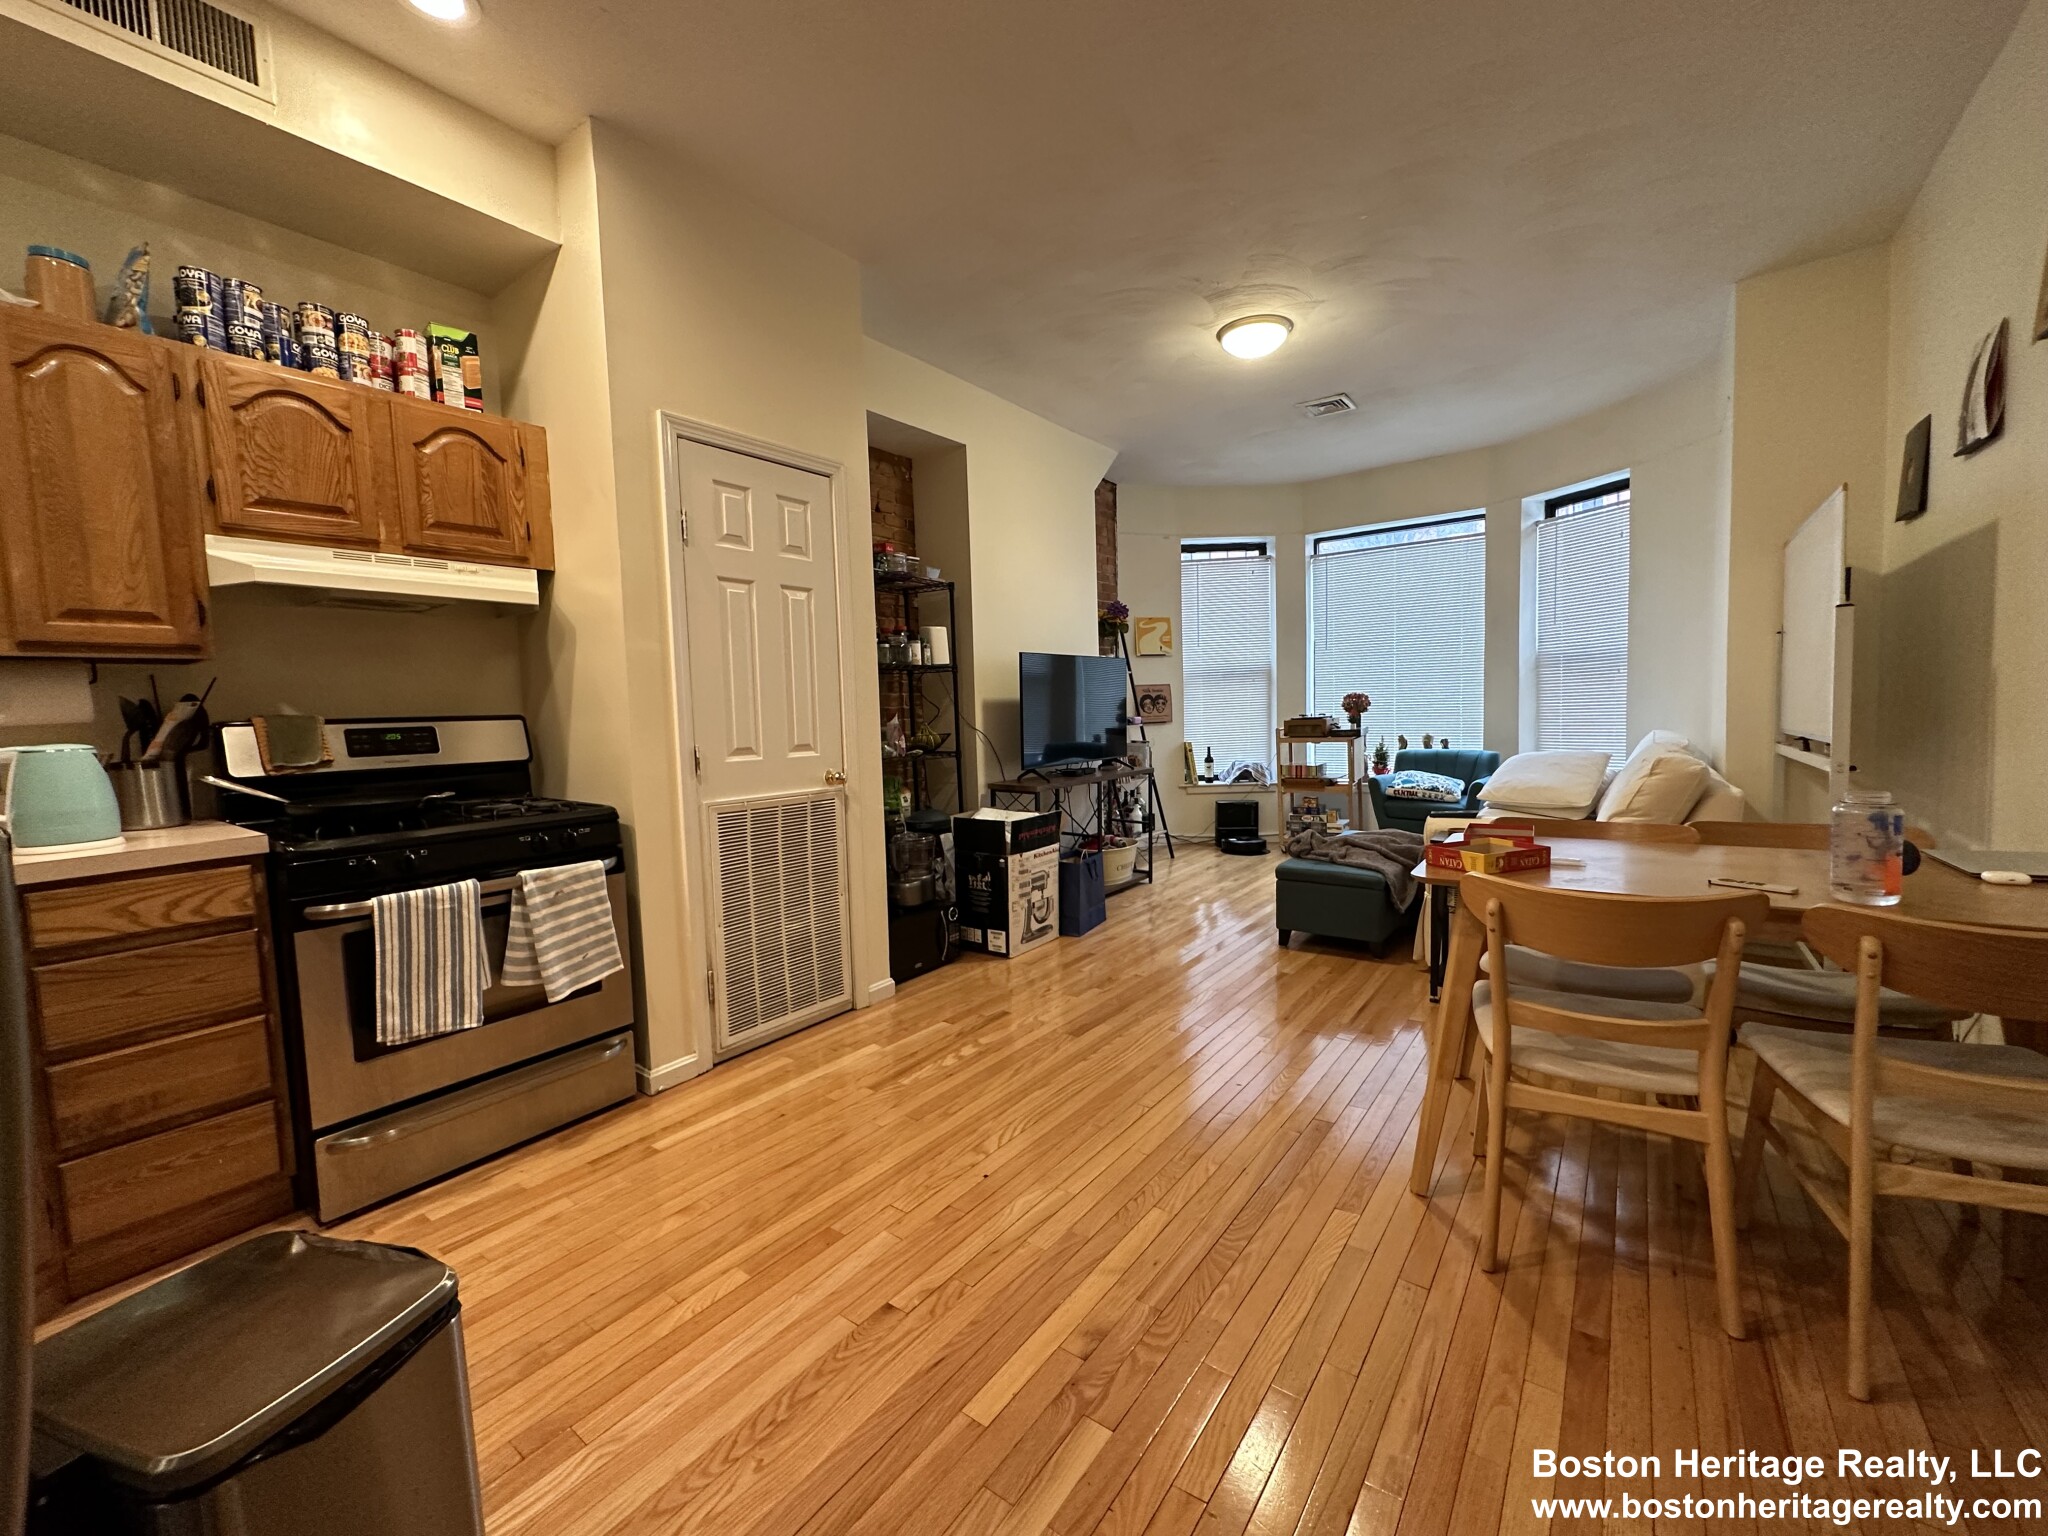 2 Beds, 1 Bath apartment in Boston, Fenway for $3,700